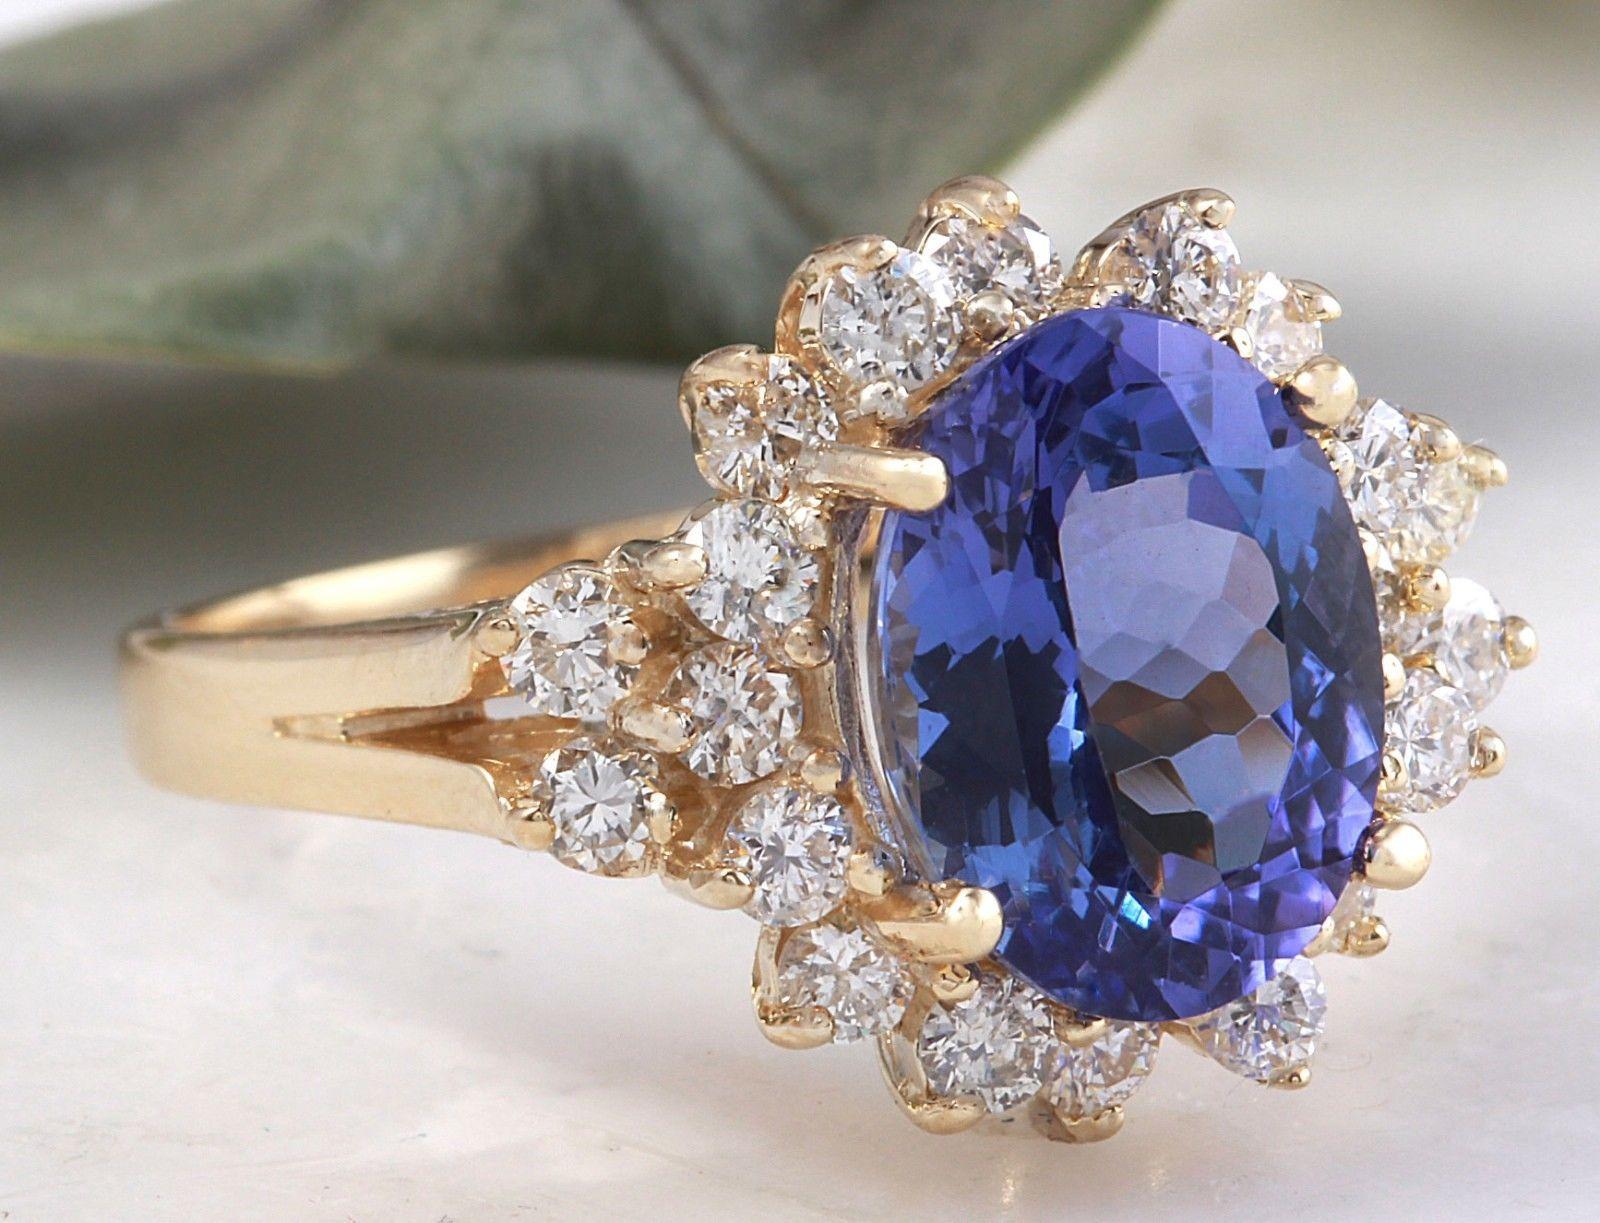 5.50 Carats Natural Very Nice Looking Tanzanite and Diamond 14K Solid Yellow Gold Ring

Total Natural Oval Cut Tanzanite Weight is: Approx. 4.50 Carats

Tanzanite Treatment: Heat

Natural Round Diamonds Weight: Approx. 1.00 Carats (color G-H /